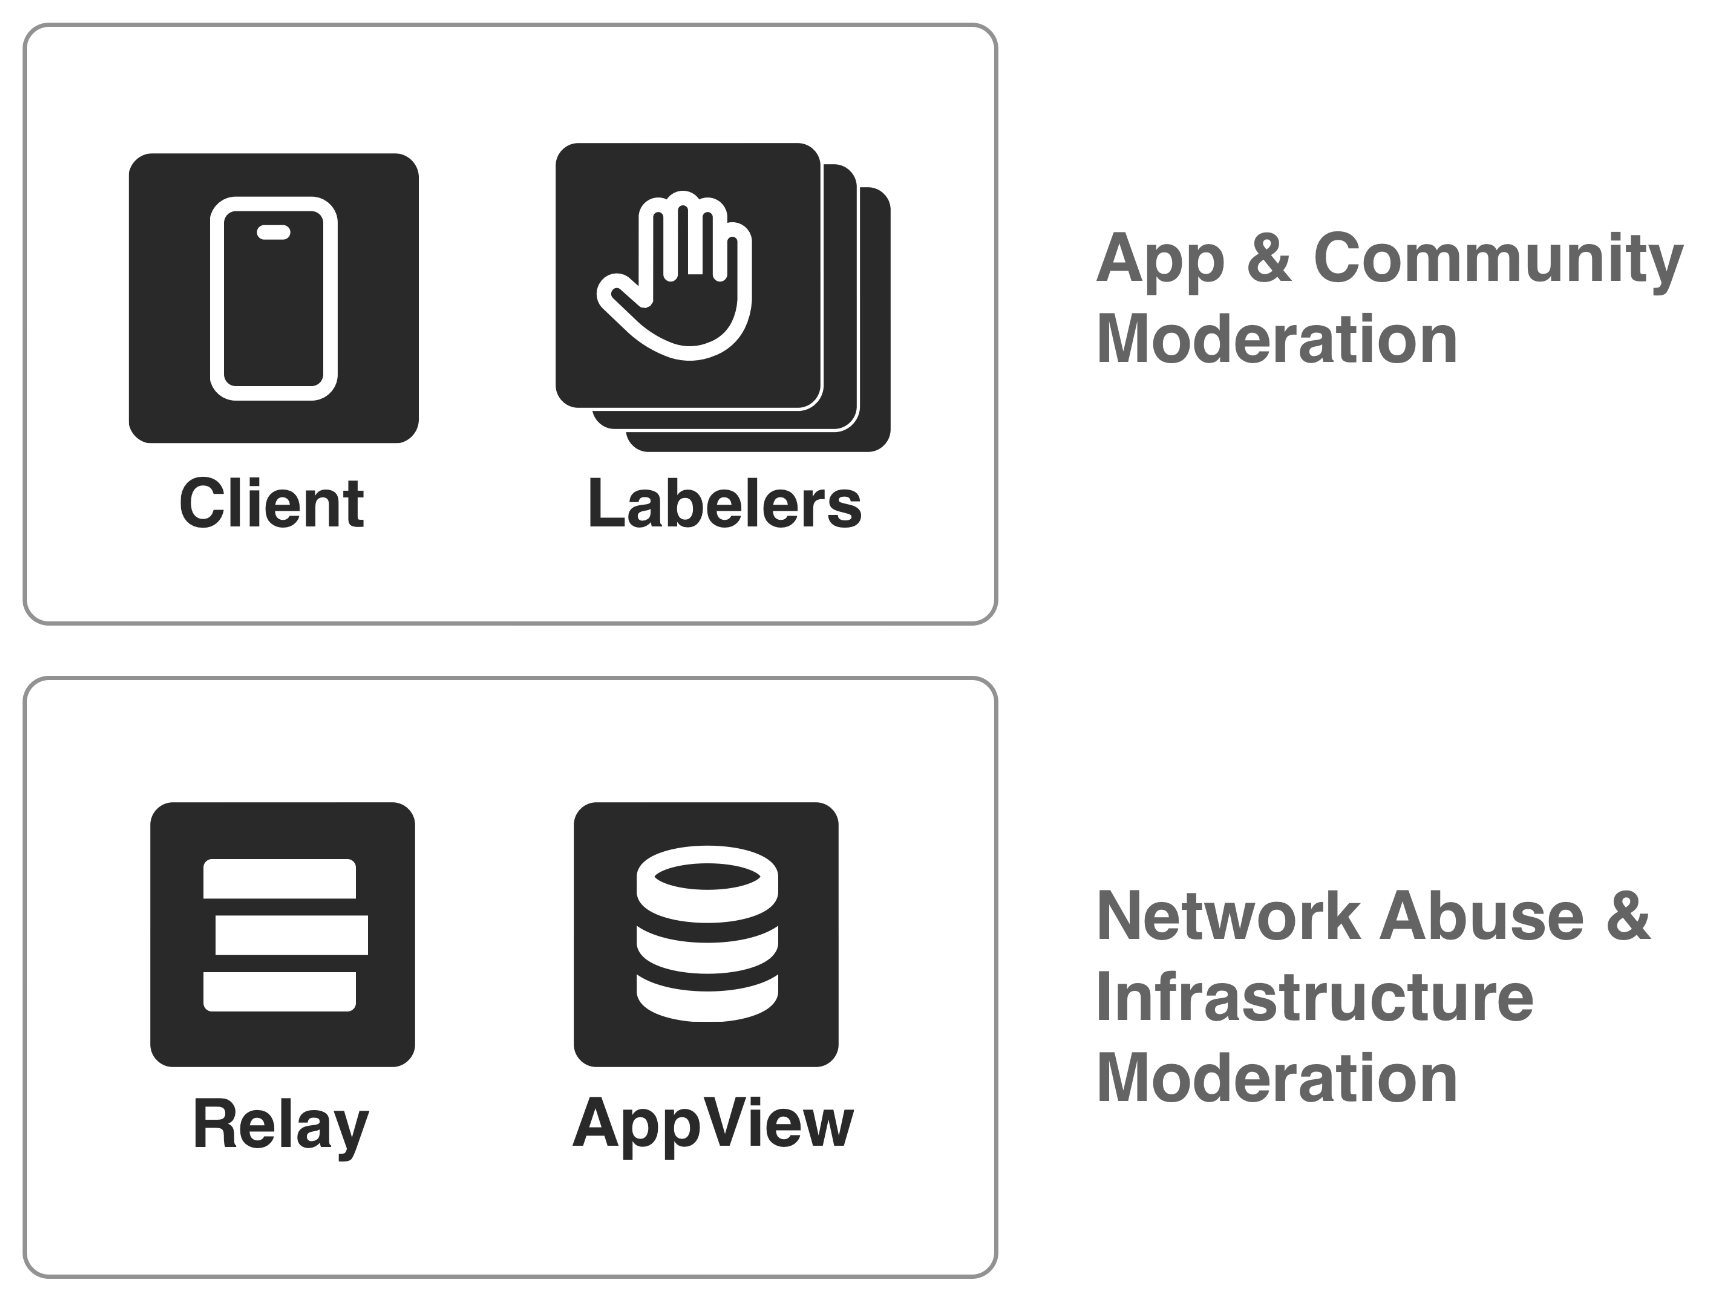 Labels drive moderation in the client. The Relay and Appview apply infrastructure moderation.